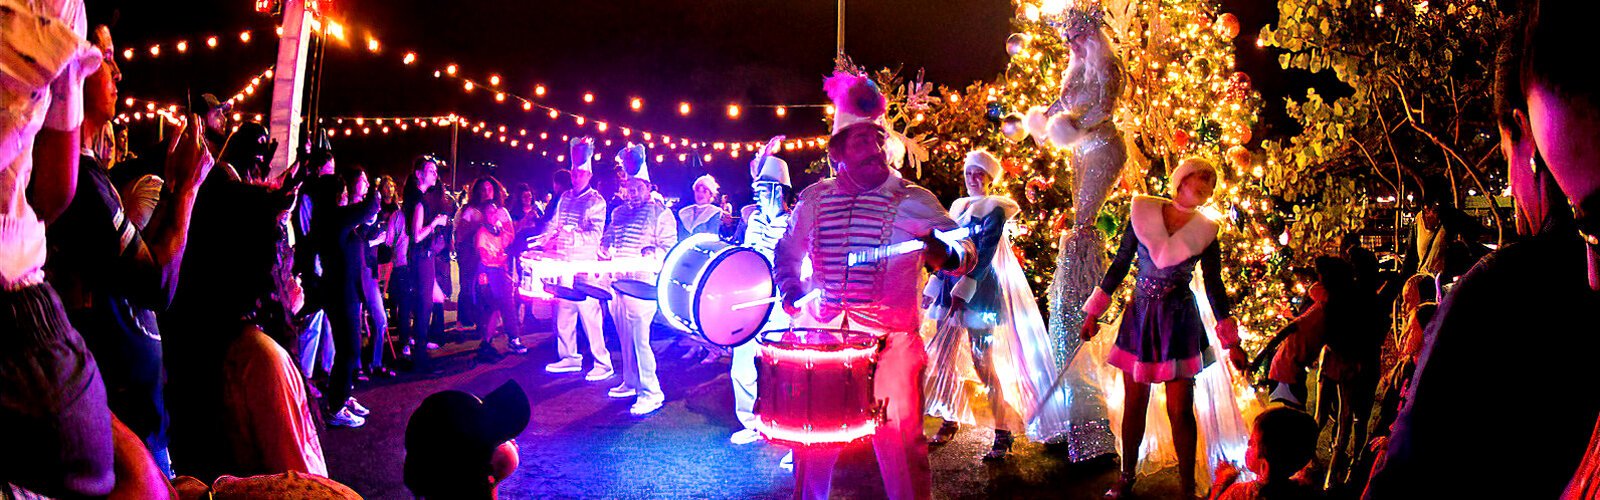 Sparkman Wharf is transformed into Winter Wonder Wharf with holiday-themed performances and hundreds of reveling visitors of all ages.